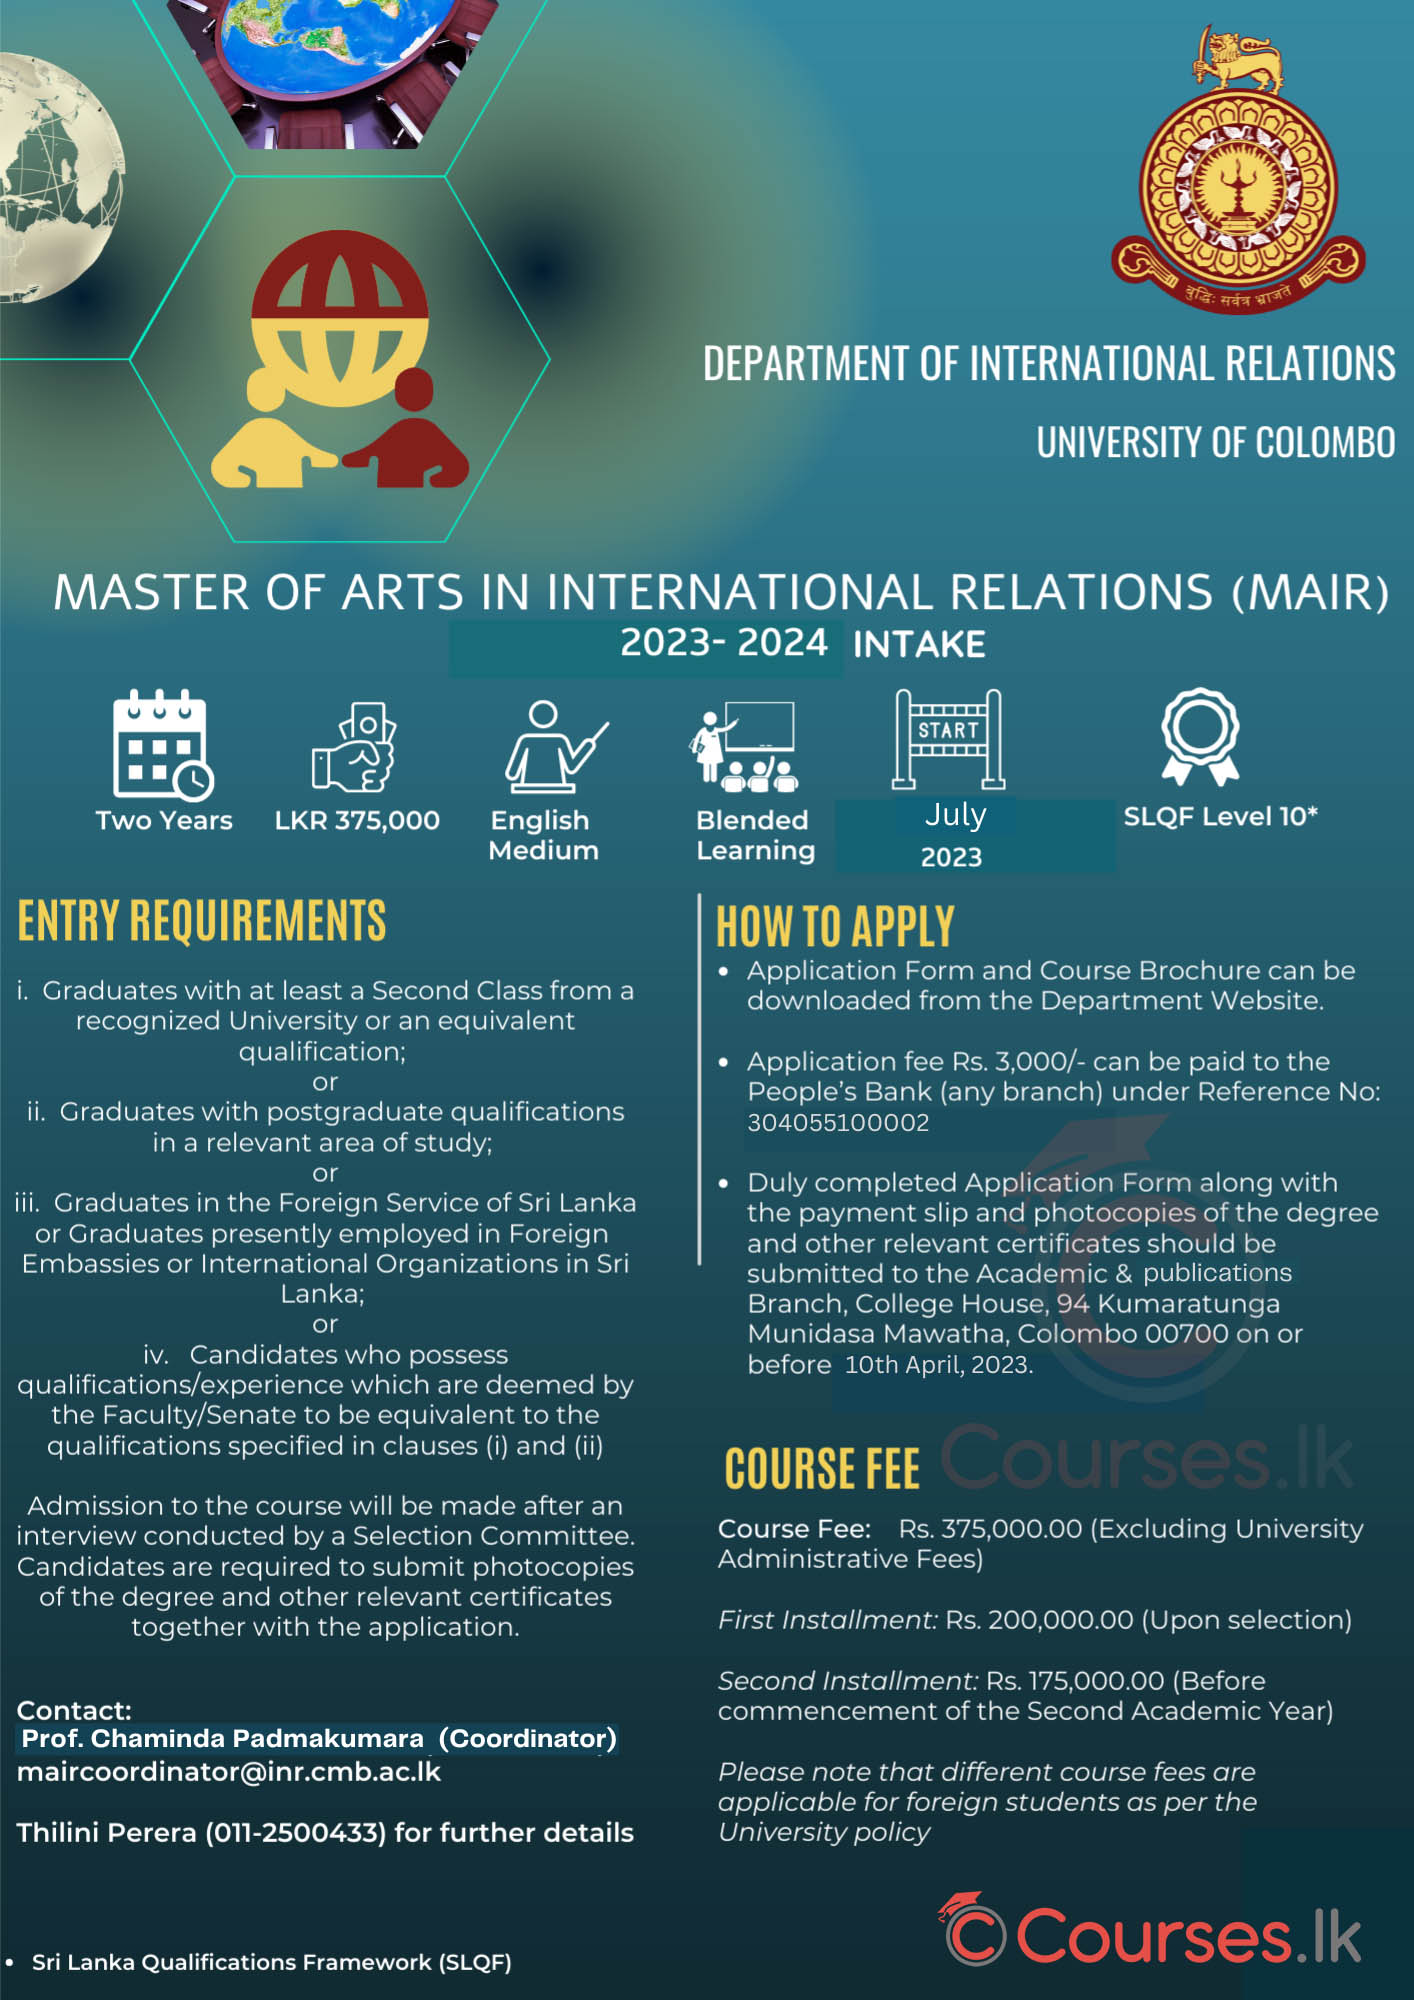 Call for Applications - Master of Arts (MA) in International Relations (MAIR) Intake 2023/24 from the Department of International Relations, Faculty of Arts, University of Colombo